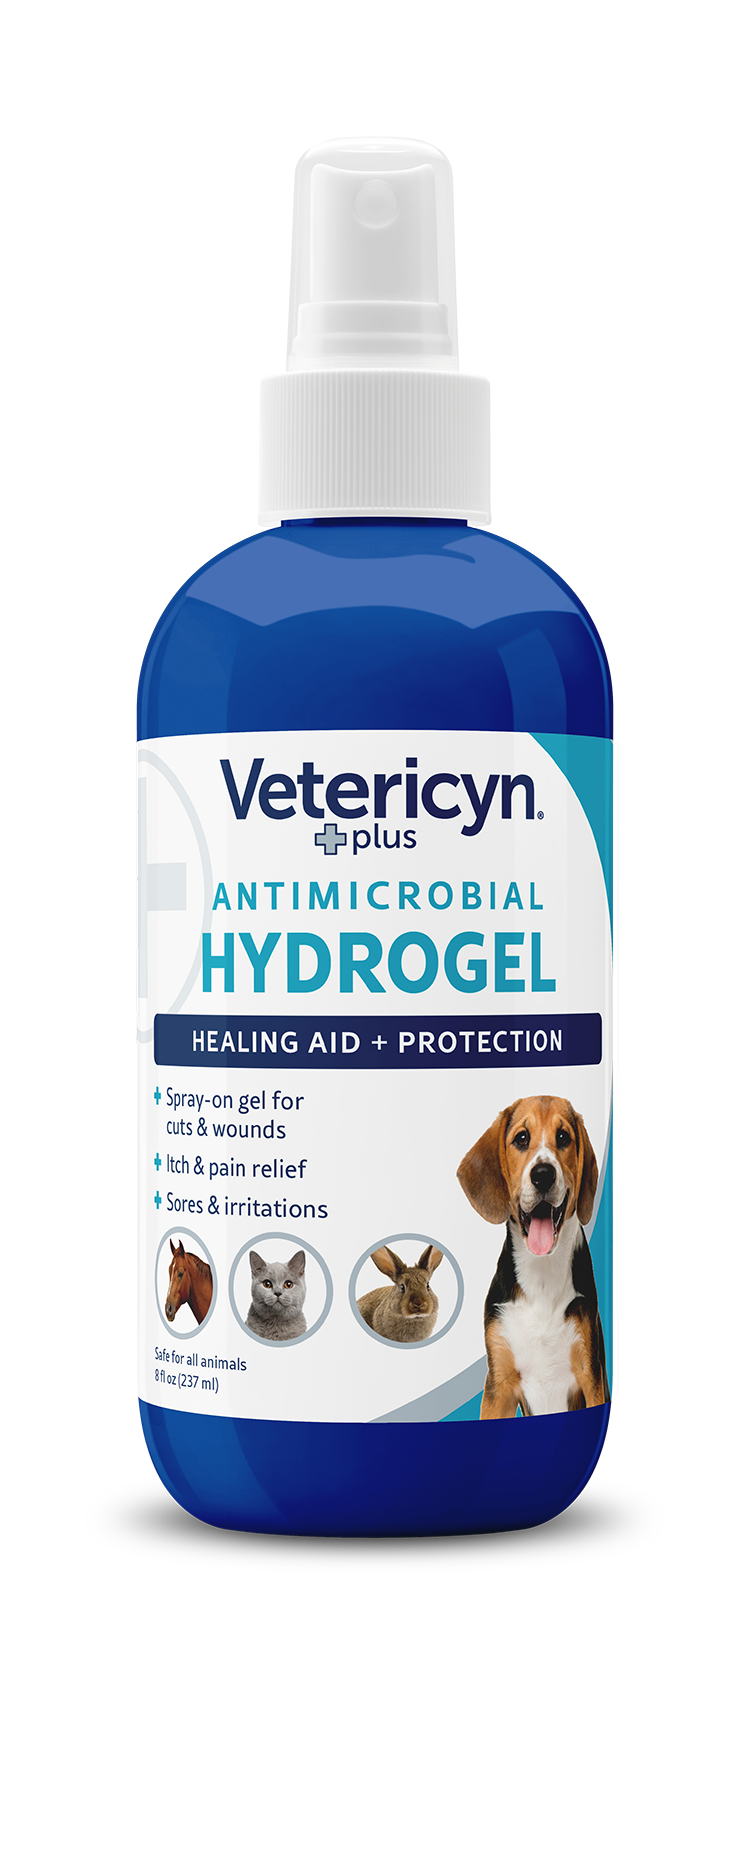 Vetericyn Plus Antimicrobial All Animal Wound Care Hydrogel Spray, 8-ounce